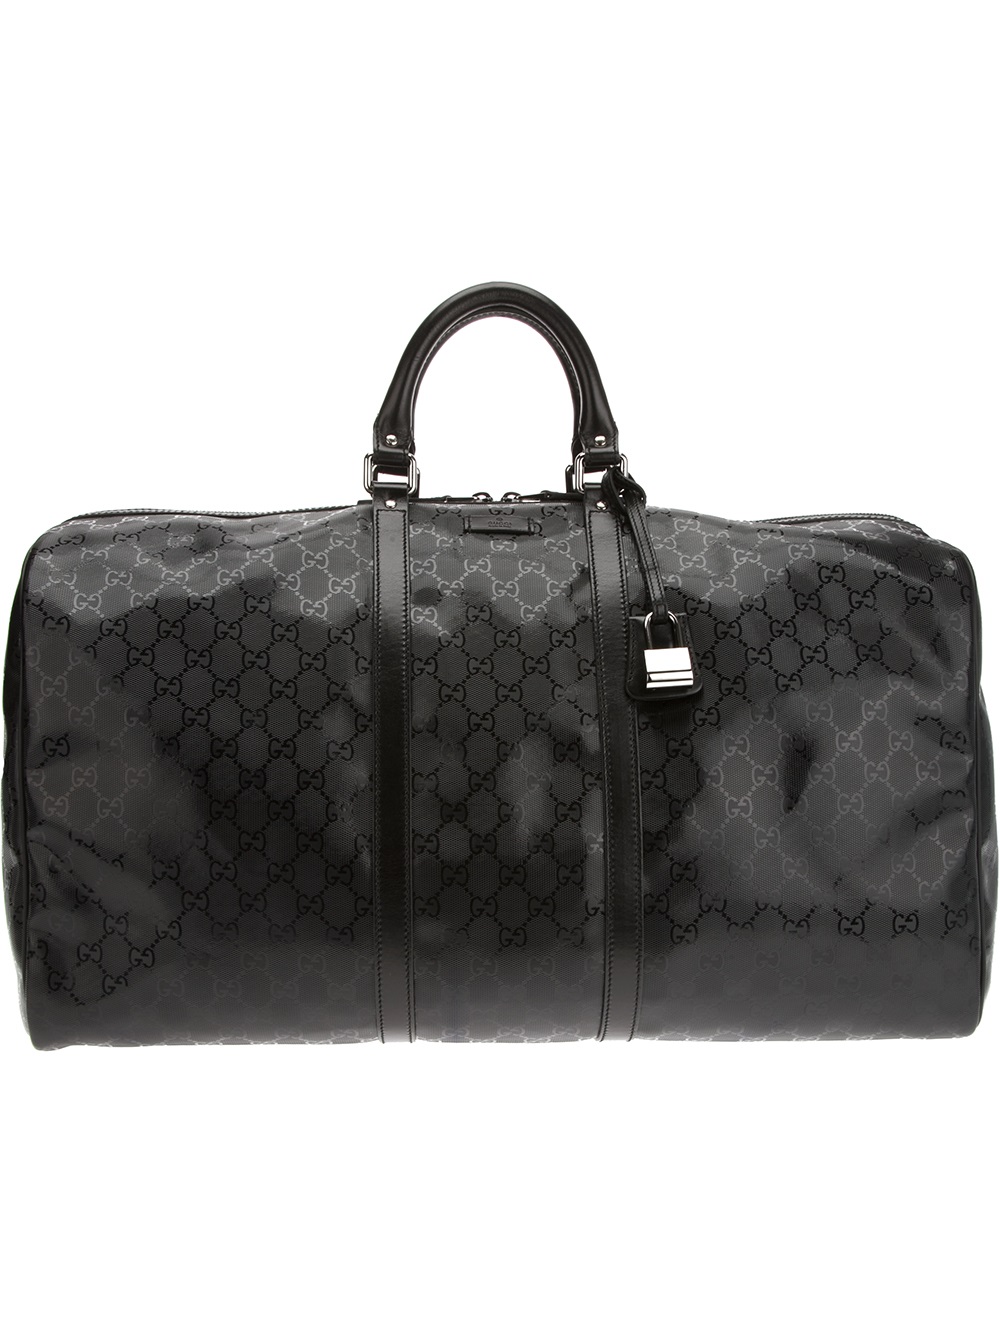 Gucci Large Holdall in Black - Lyst